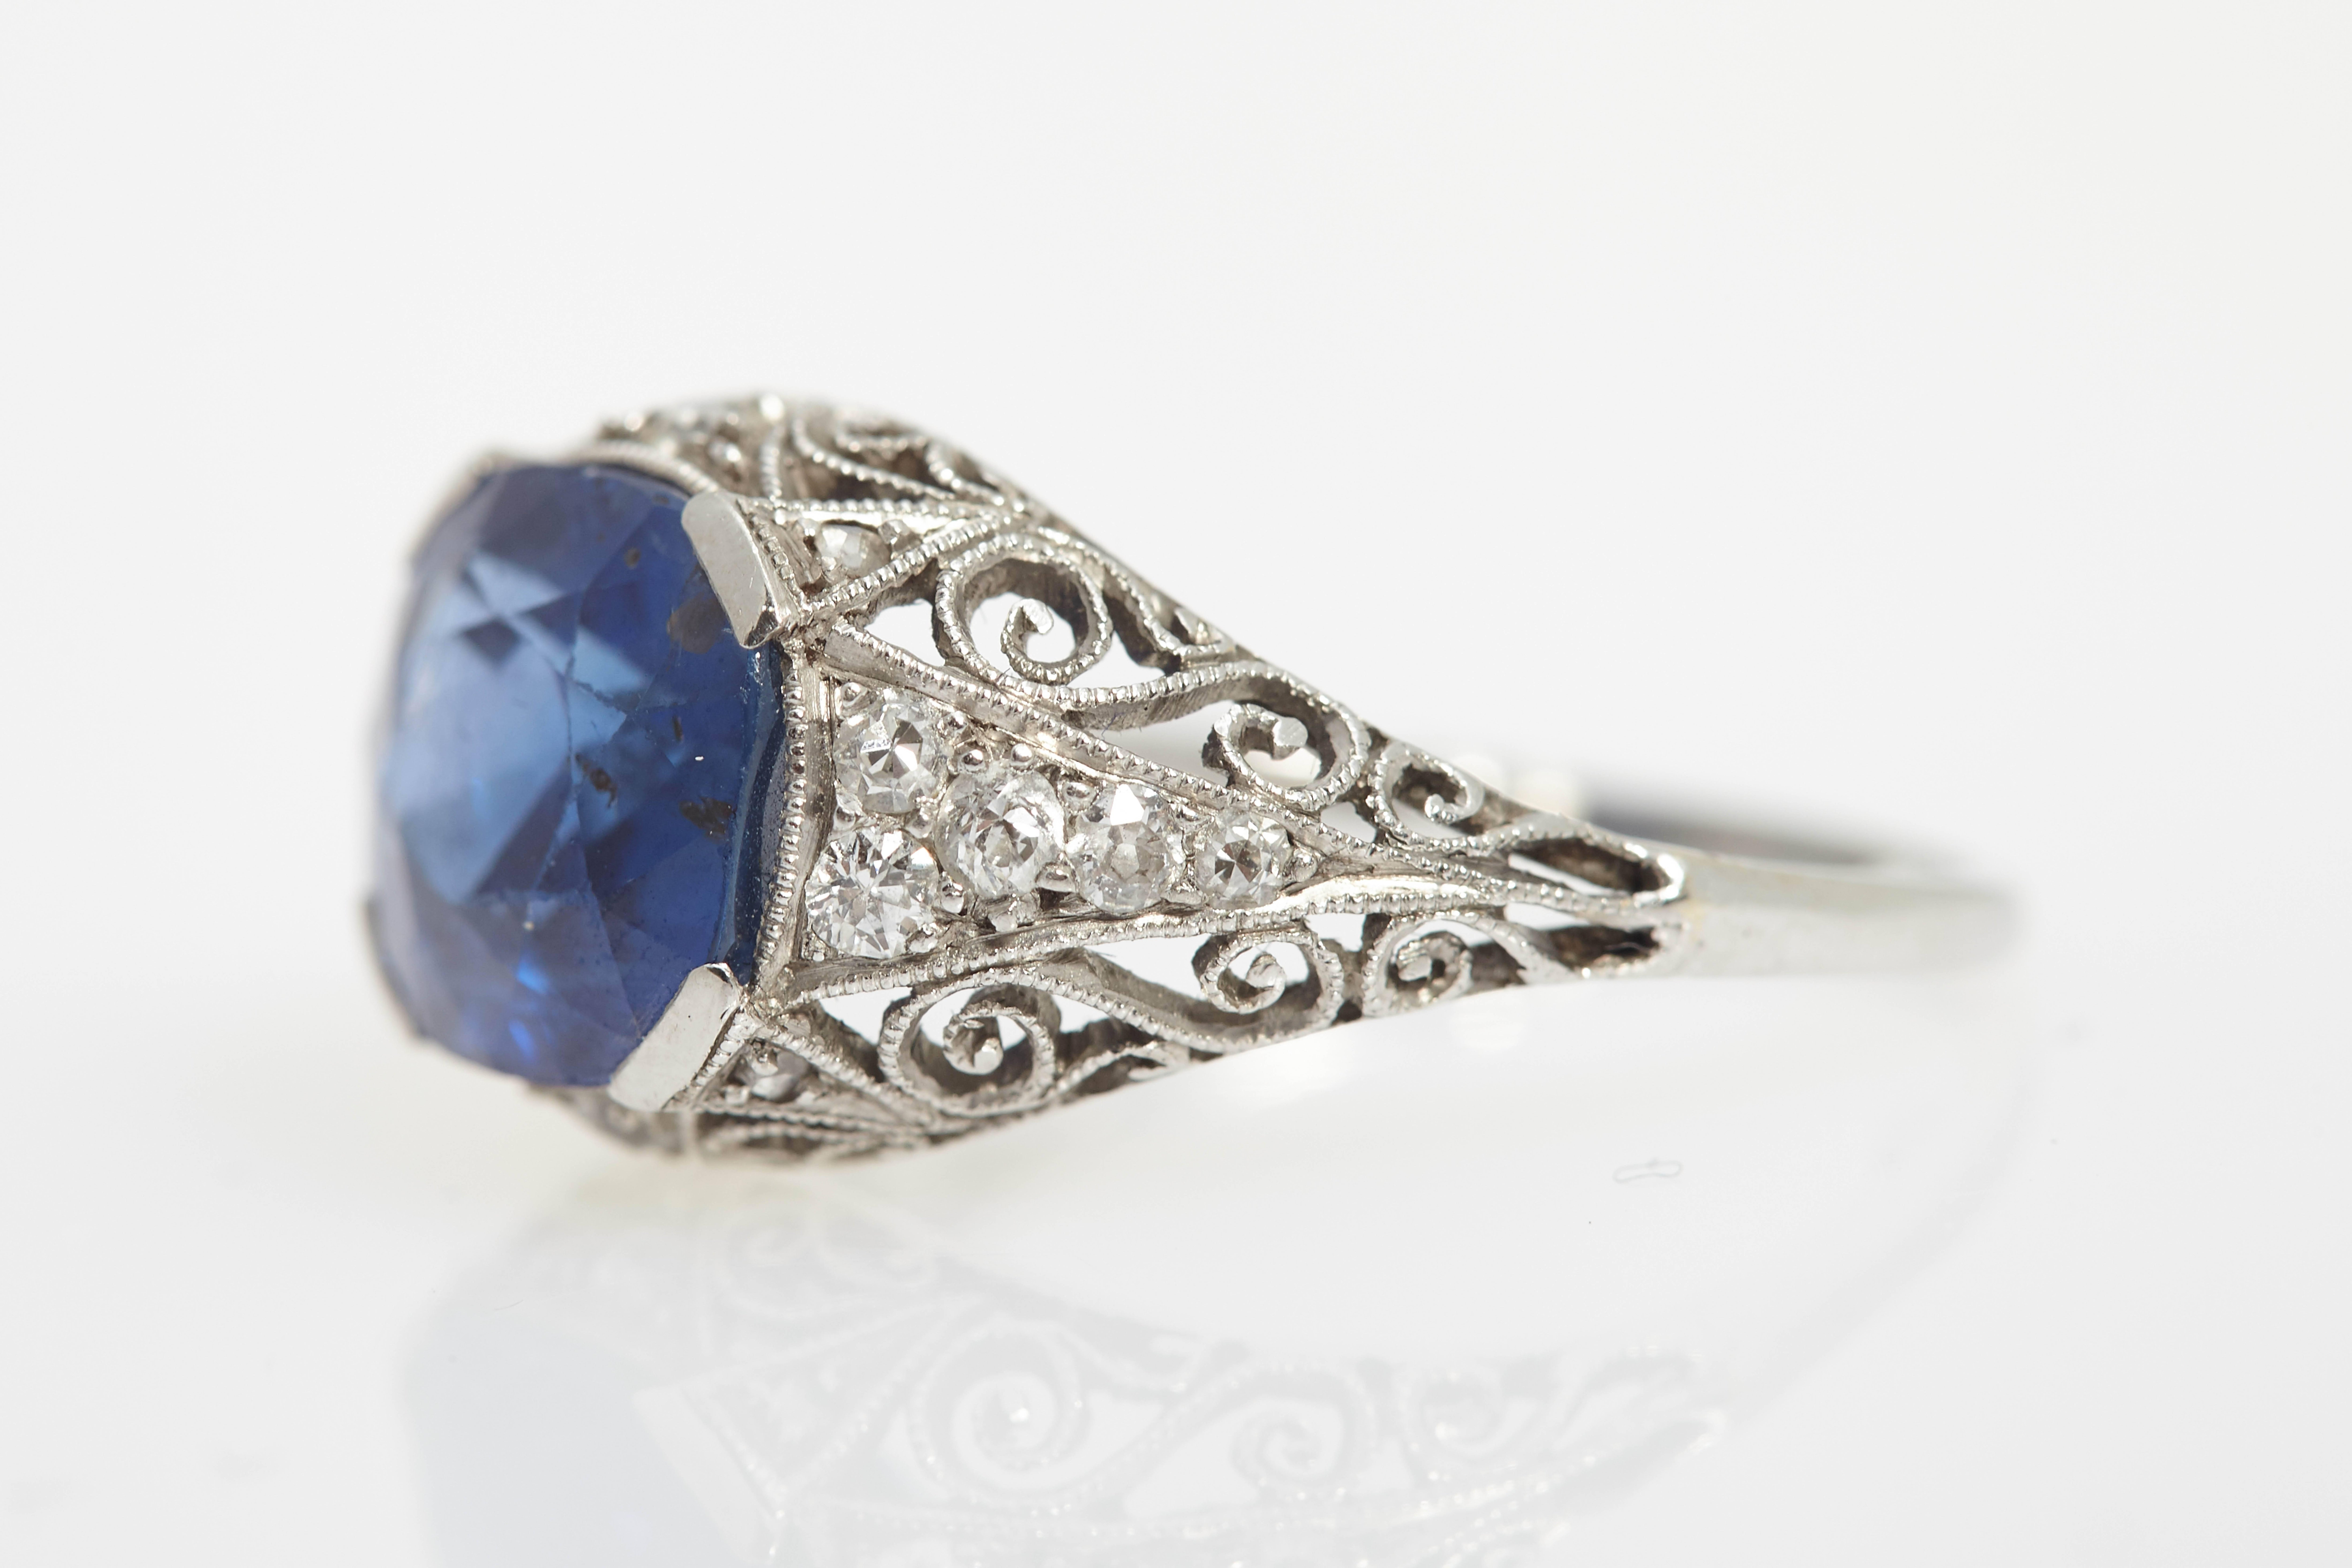 An Antique ring showcasing a fine Burma Sapphire (non-heated) weighing 5.16ct, highlighted by old cut diamonds. Mounted on platinum. Made in Italy, circa 1905. 